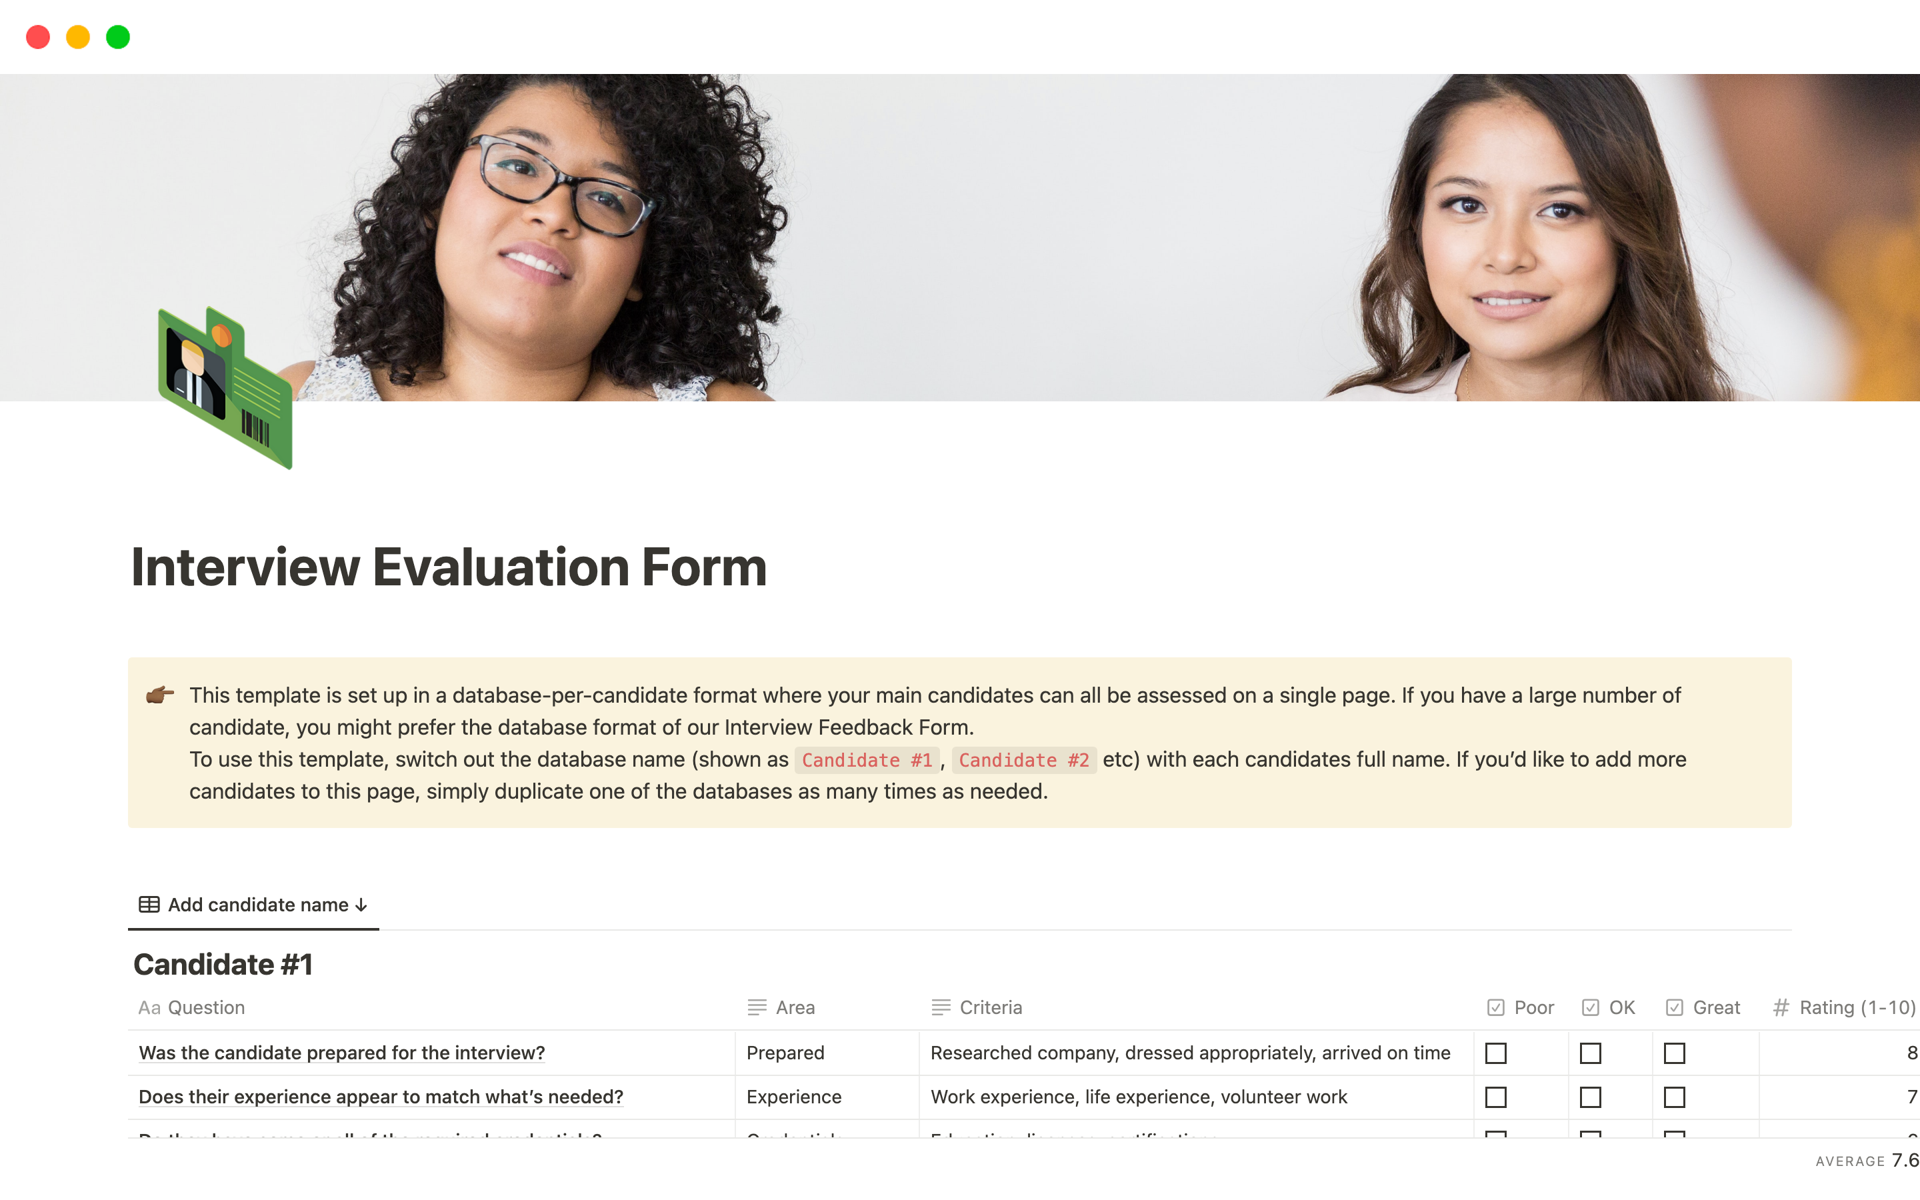 Use this interview evaluation form to rank the candidate’s overall qualifications for the position for which they have applied.